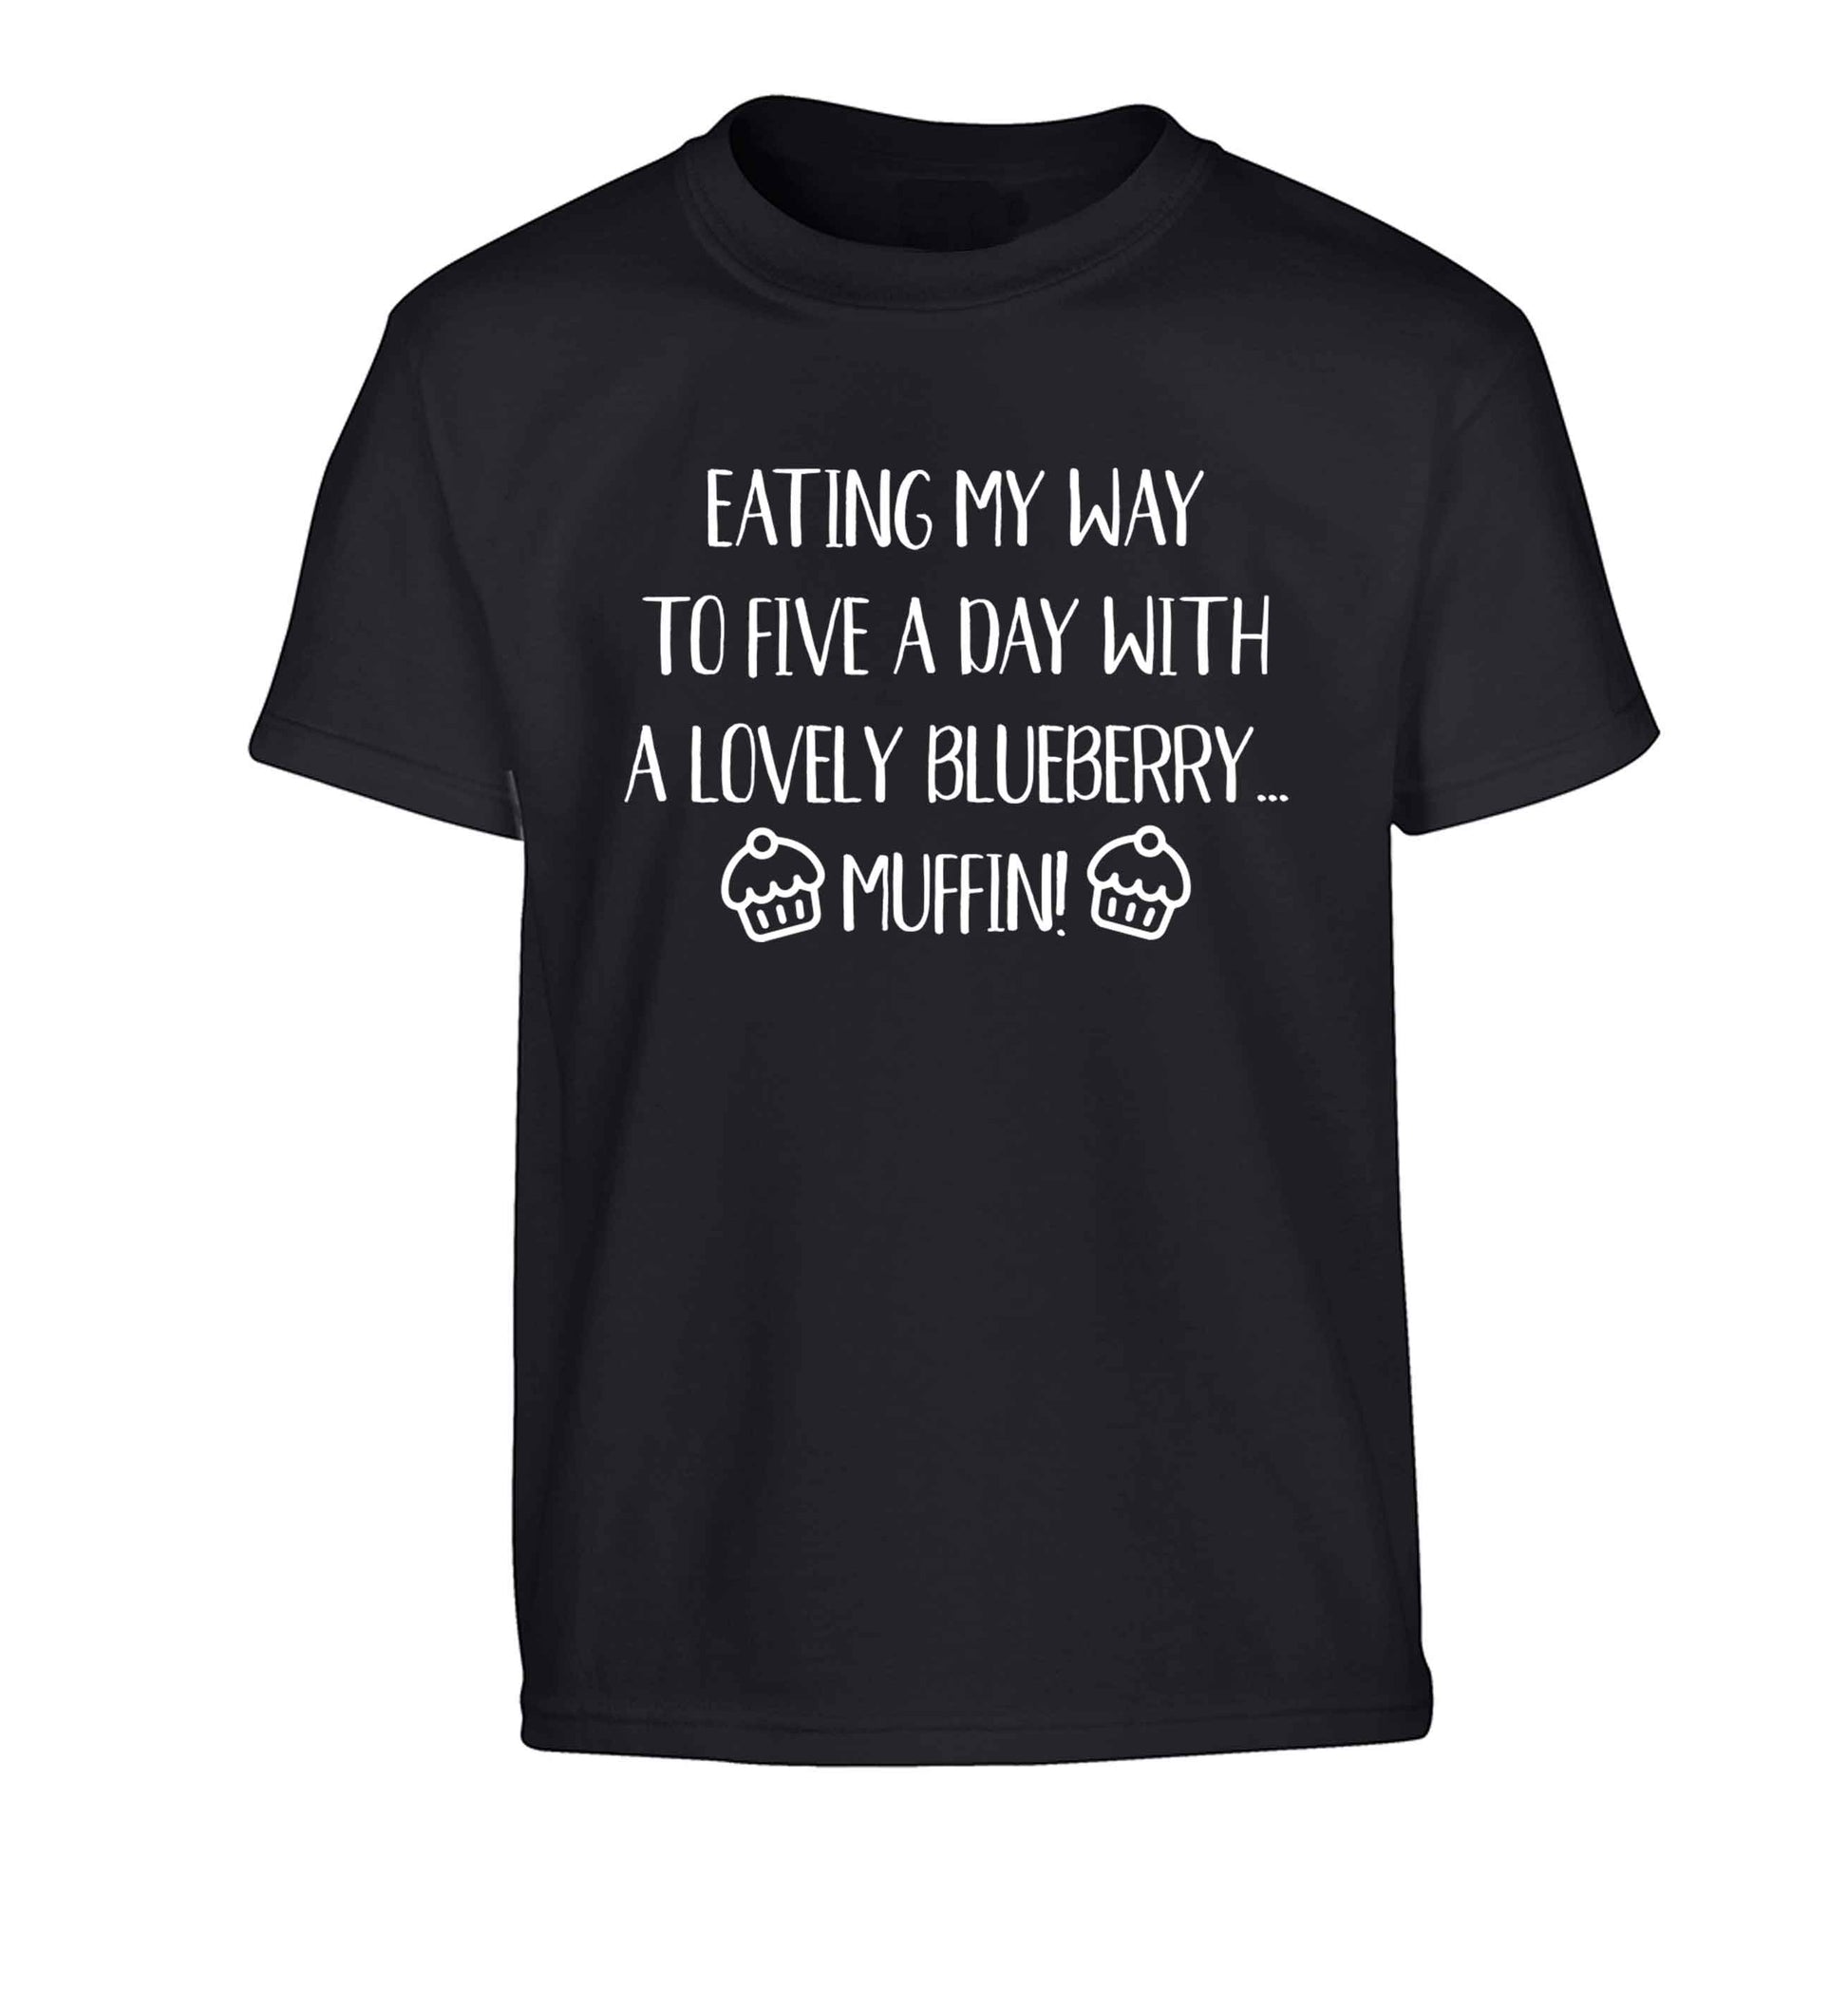 Eating my way to five a day with a lovely blueberry muffin Children's black Tshirt 12-13 Years